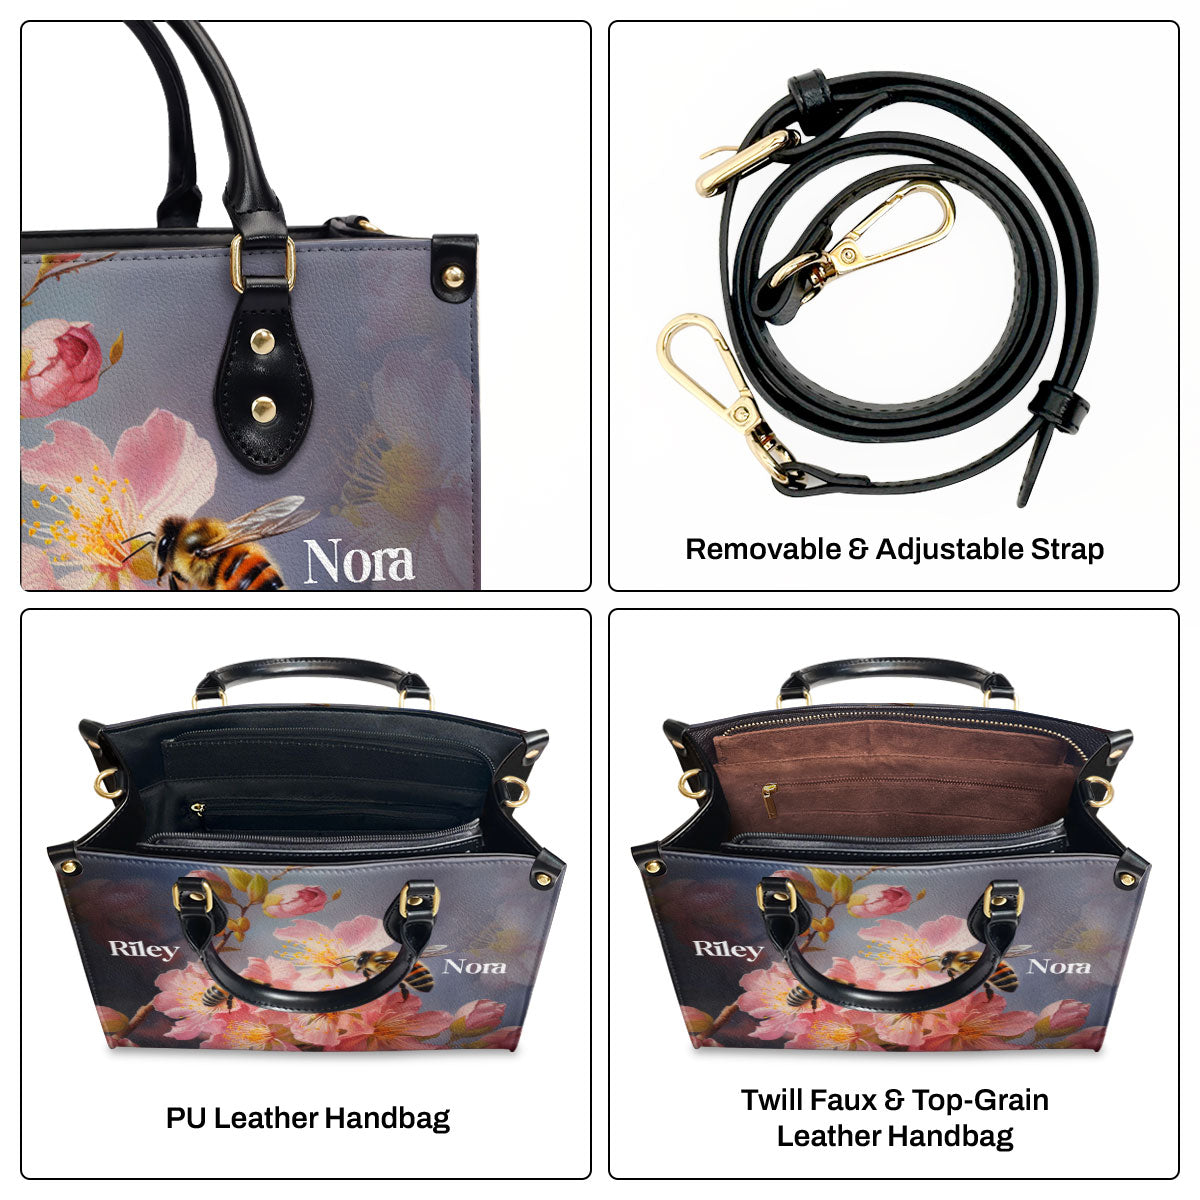 Bees And Blossom - Personalized Leather Handbag MS-NH1625